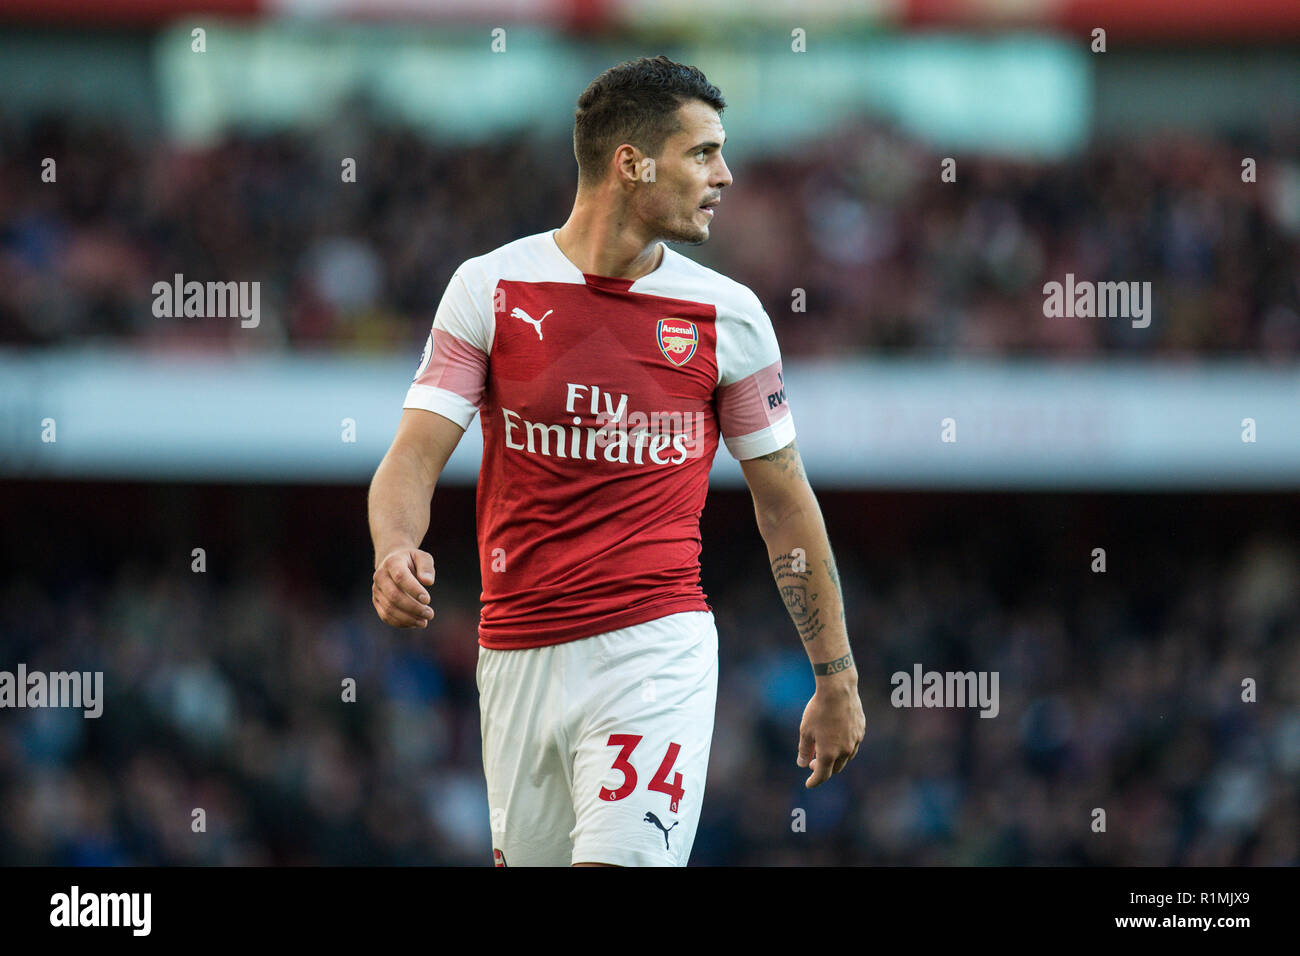 LONDON, ENGLAND - SEPTEMBER 23: Granit Xhaka of Arsenal during the Premier League match between Arsenal FC and Everton FC at Emirates Stadium on September 23, 2018 in London, United Kingdom. (MB Media) Stock Photo